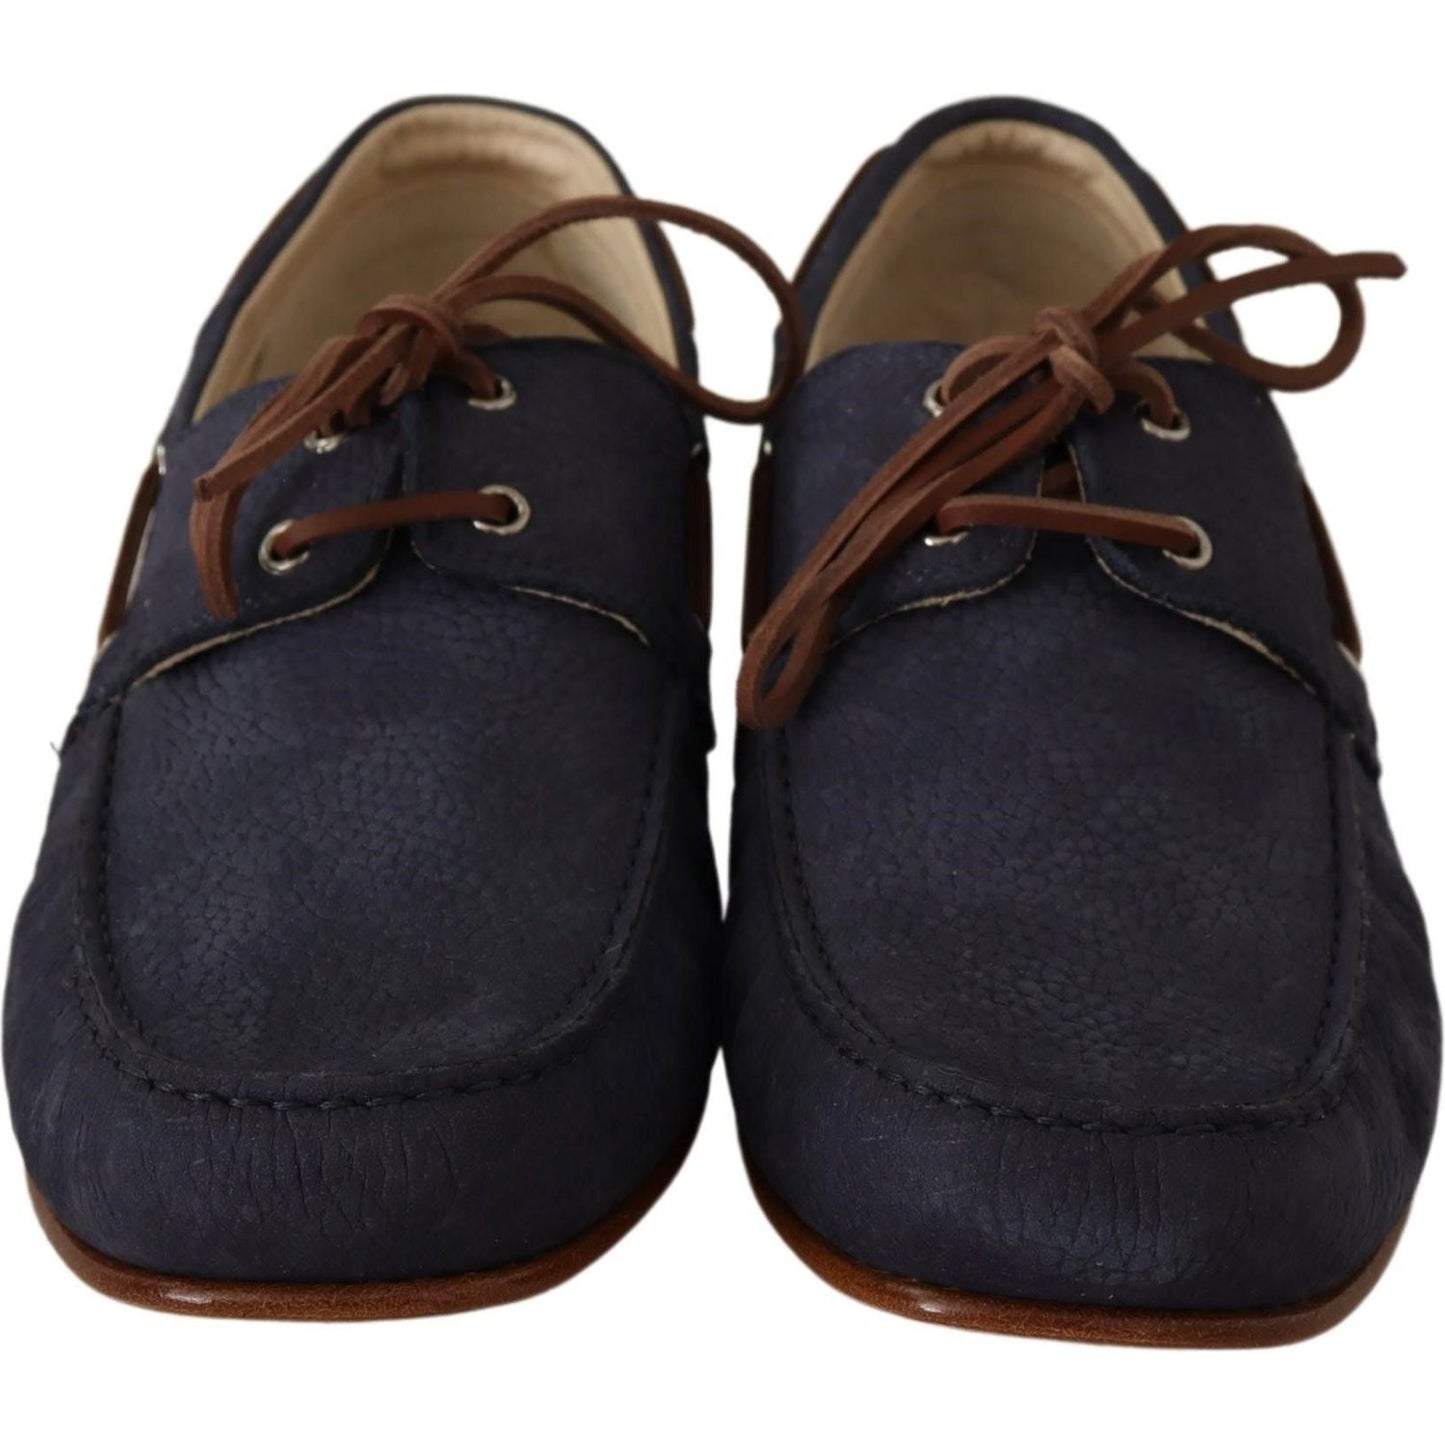 Dolce & Gabbana Elegant Blue & Brown Leather Boat Shoes MAN LOAFERS blue-leather-lace-up-men-casual-boat-shoes